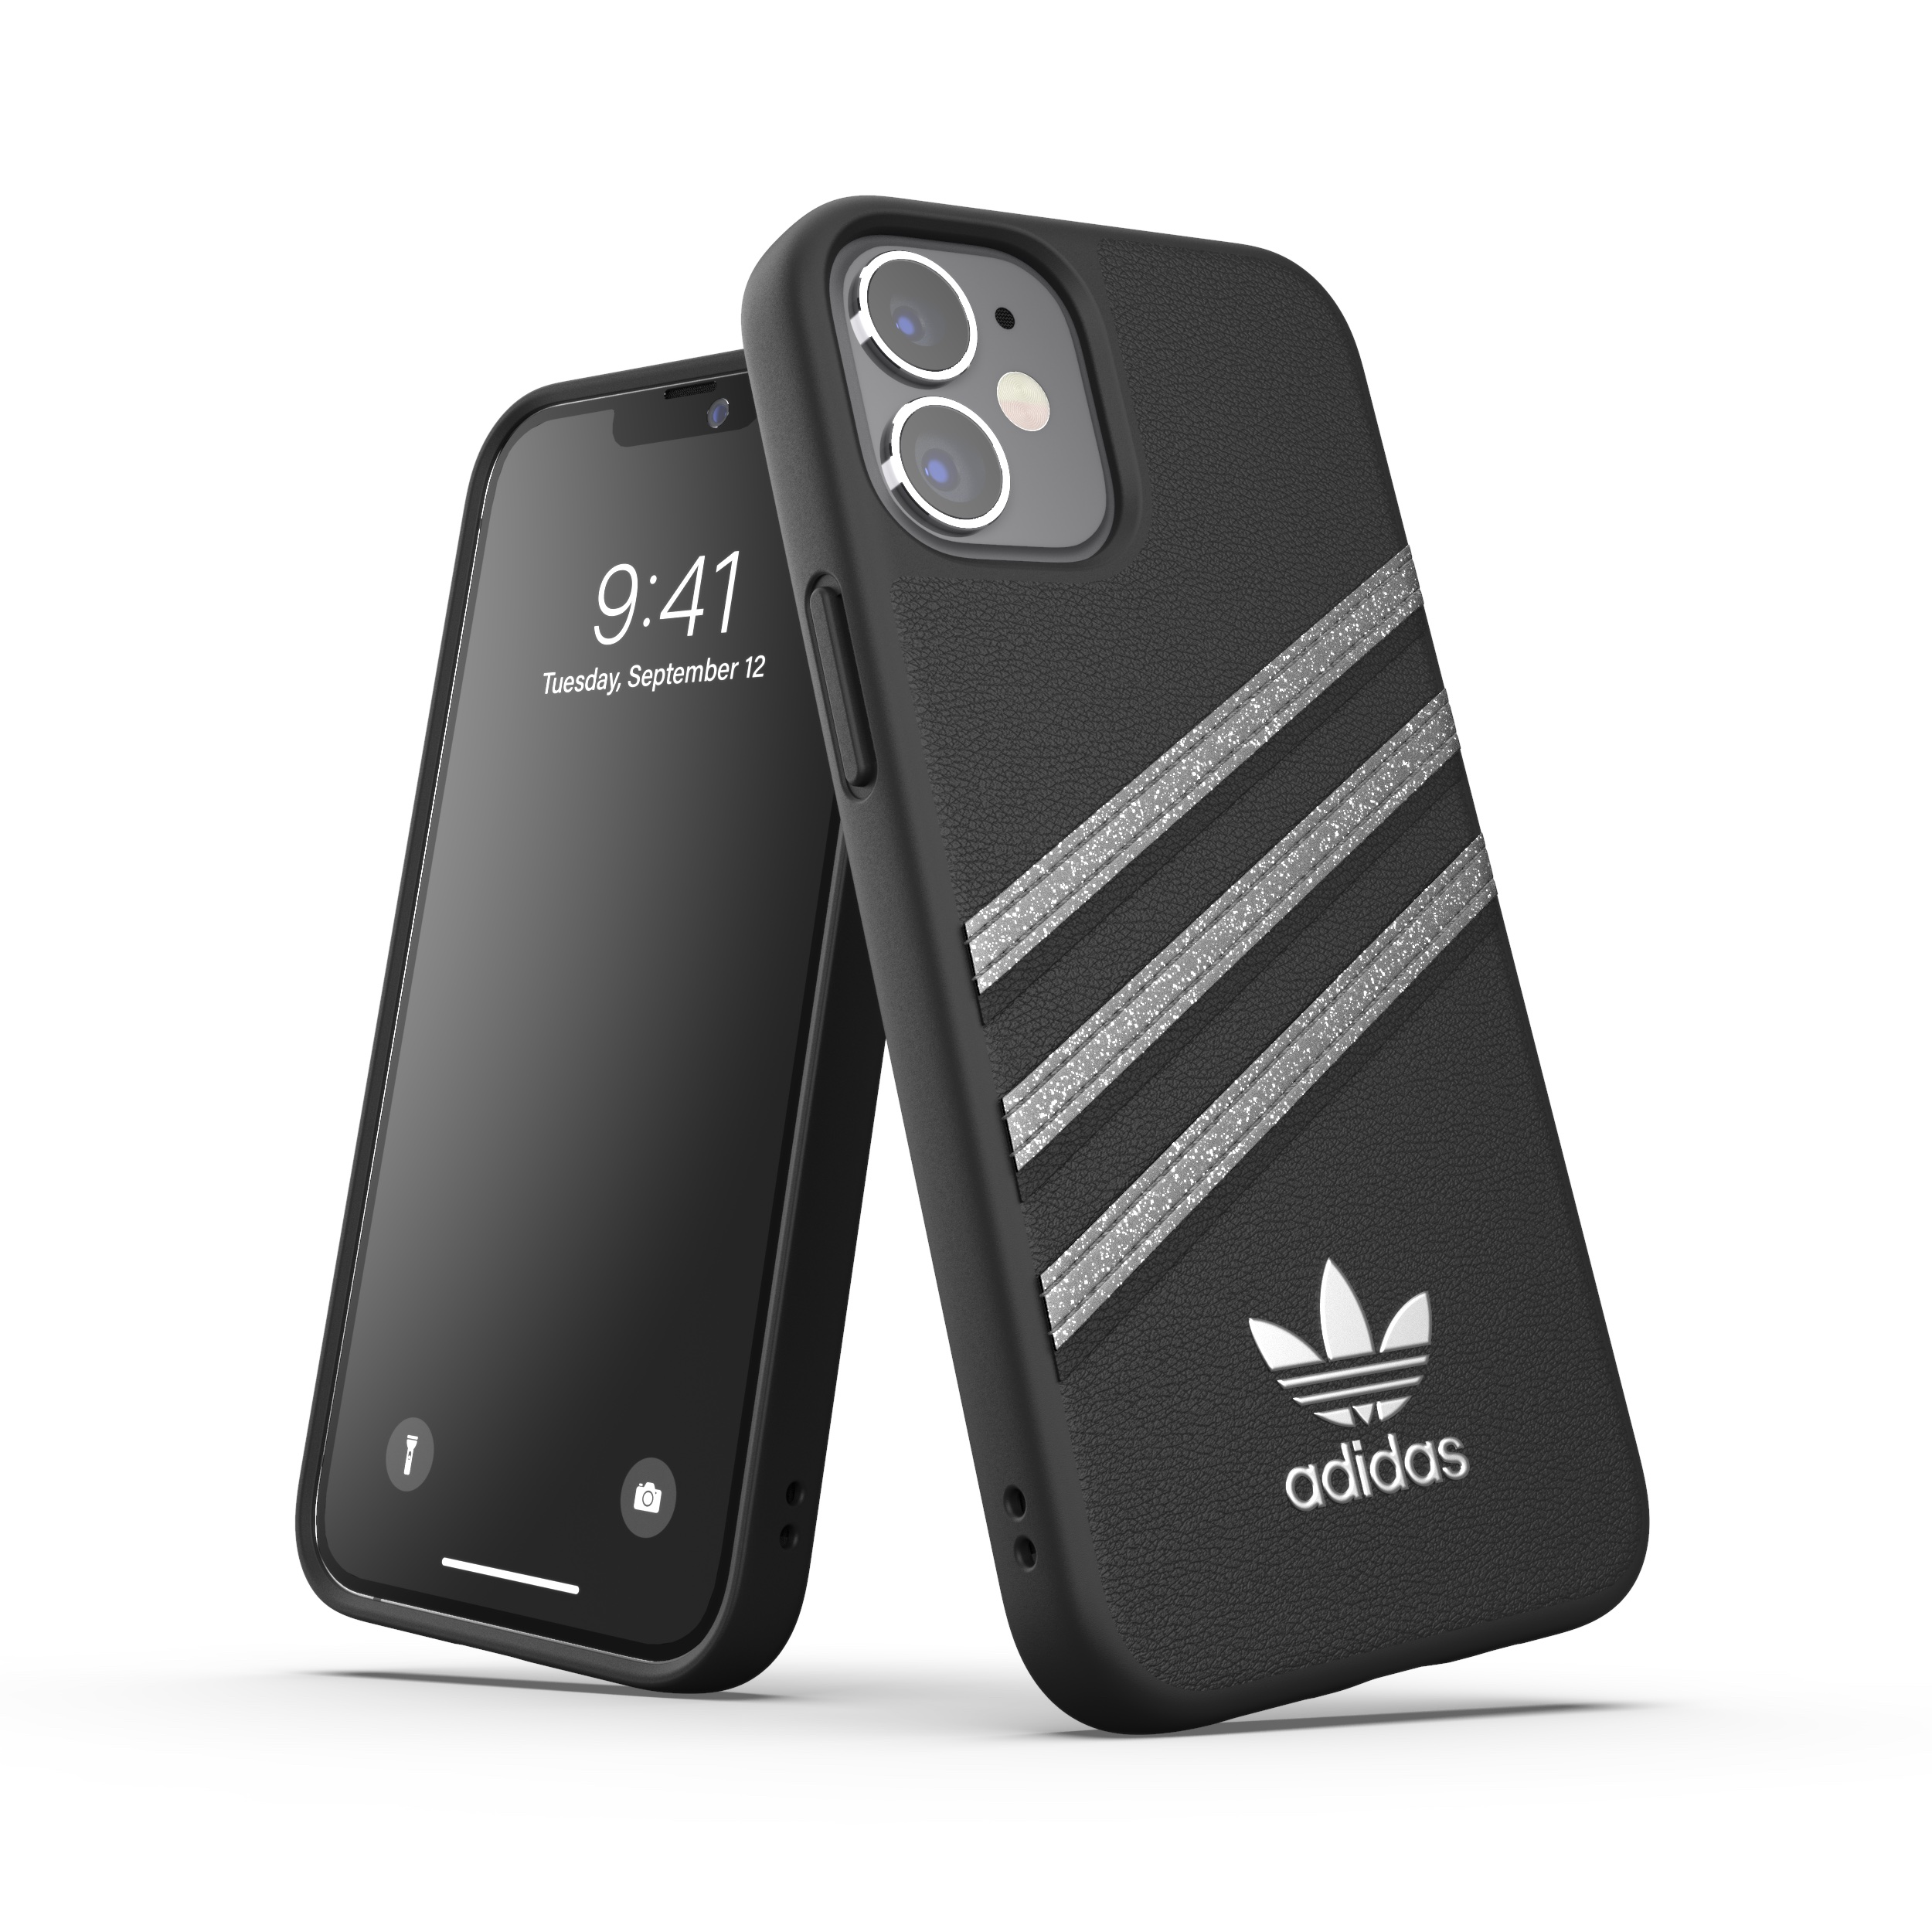 Backcover, MINI, Case Moulded Woman, ADIDAS BLACK APPLE, PU IPHONE 12